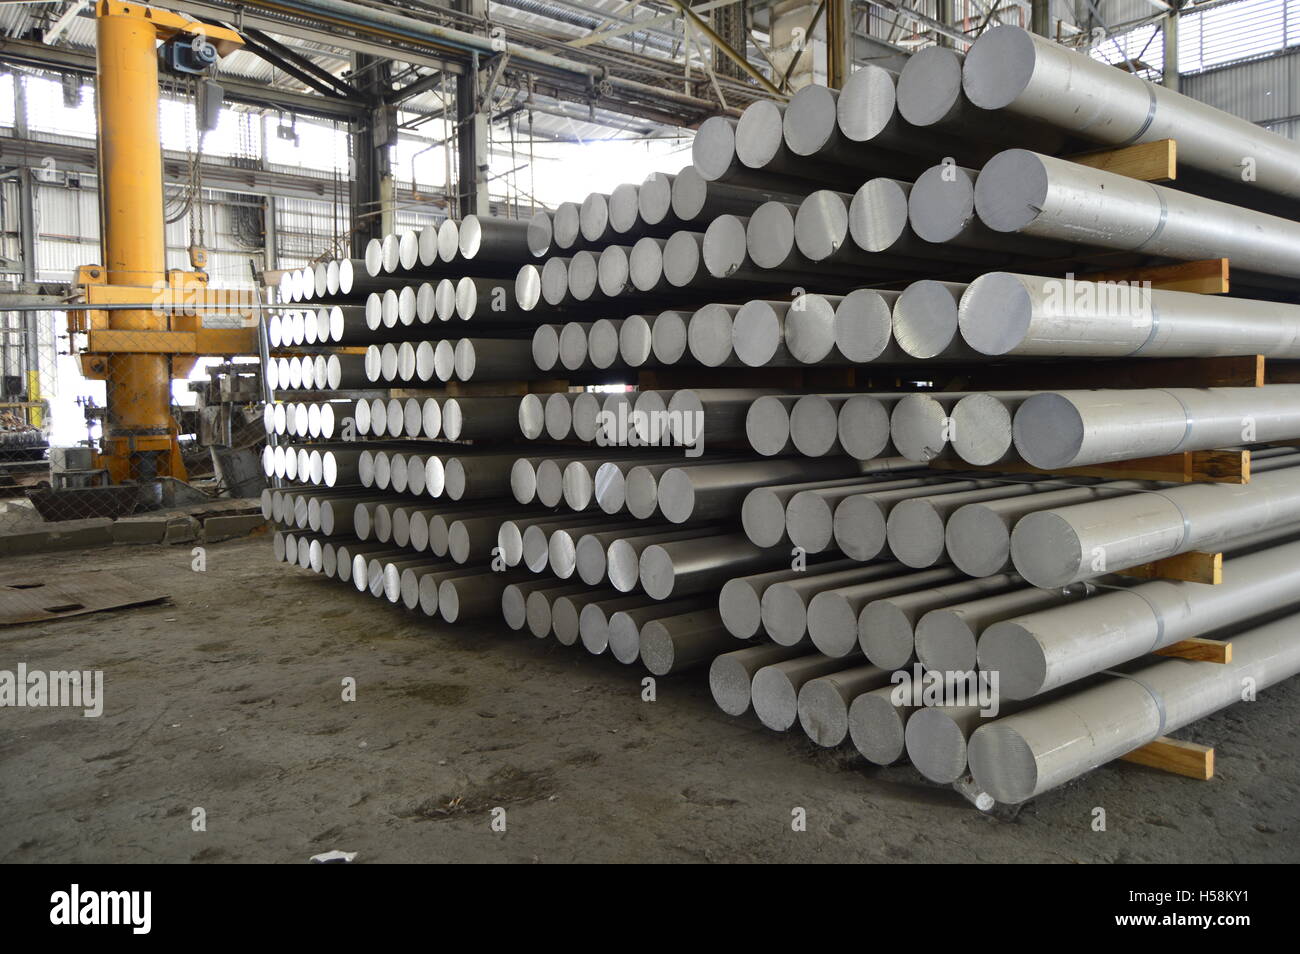 Primary aluminum metal cylinders employed in the extrusion process. Stock Photo